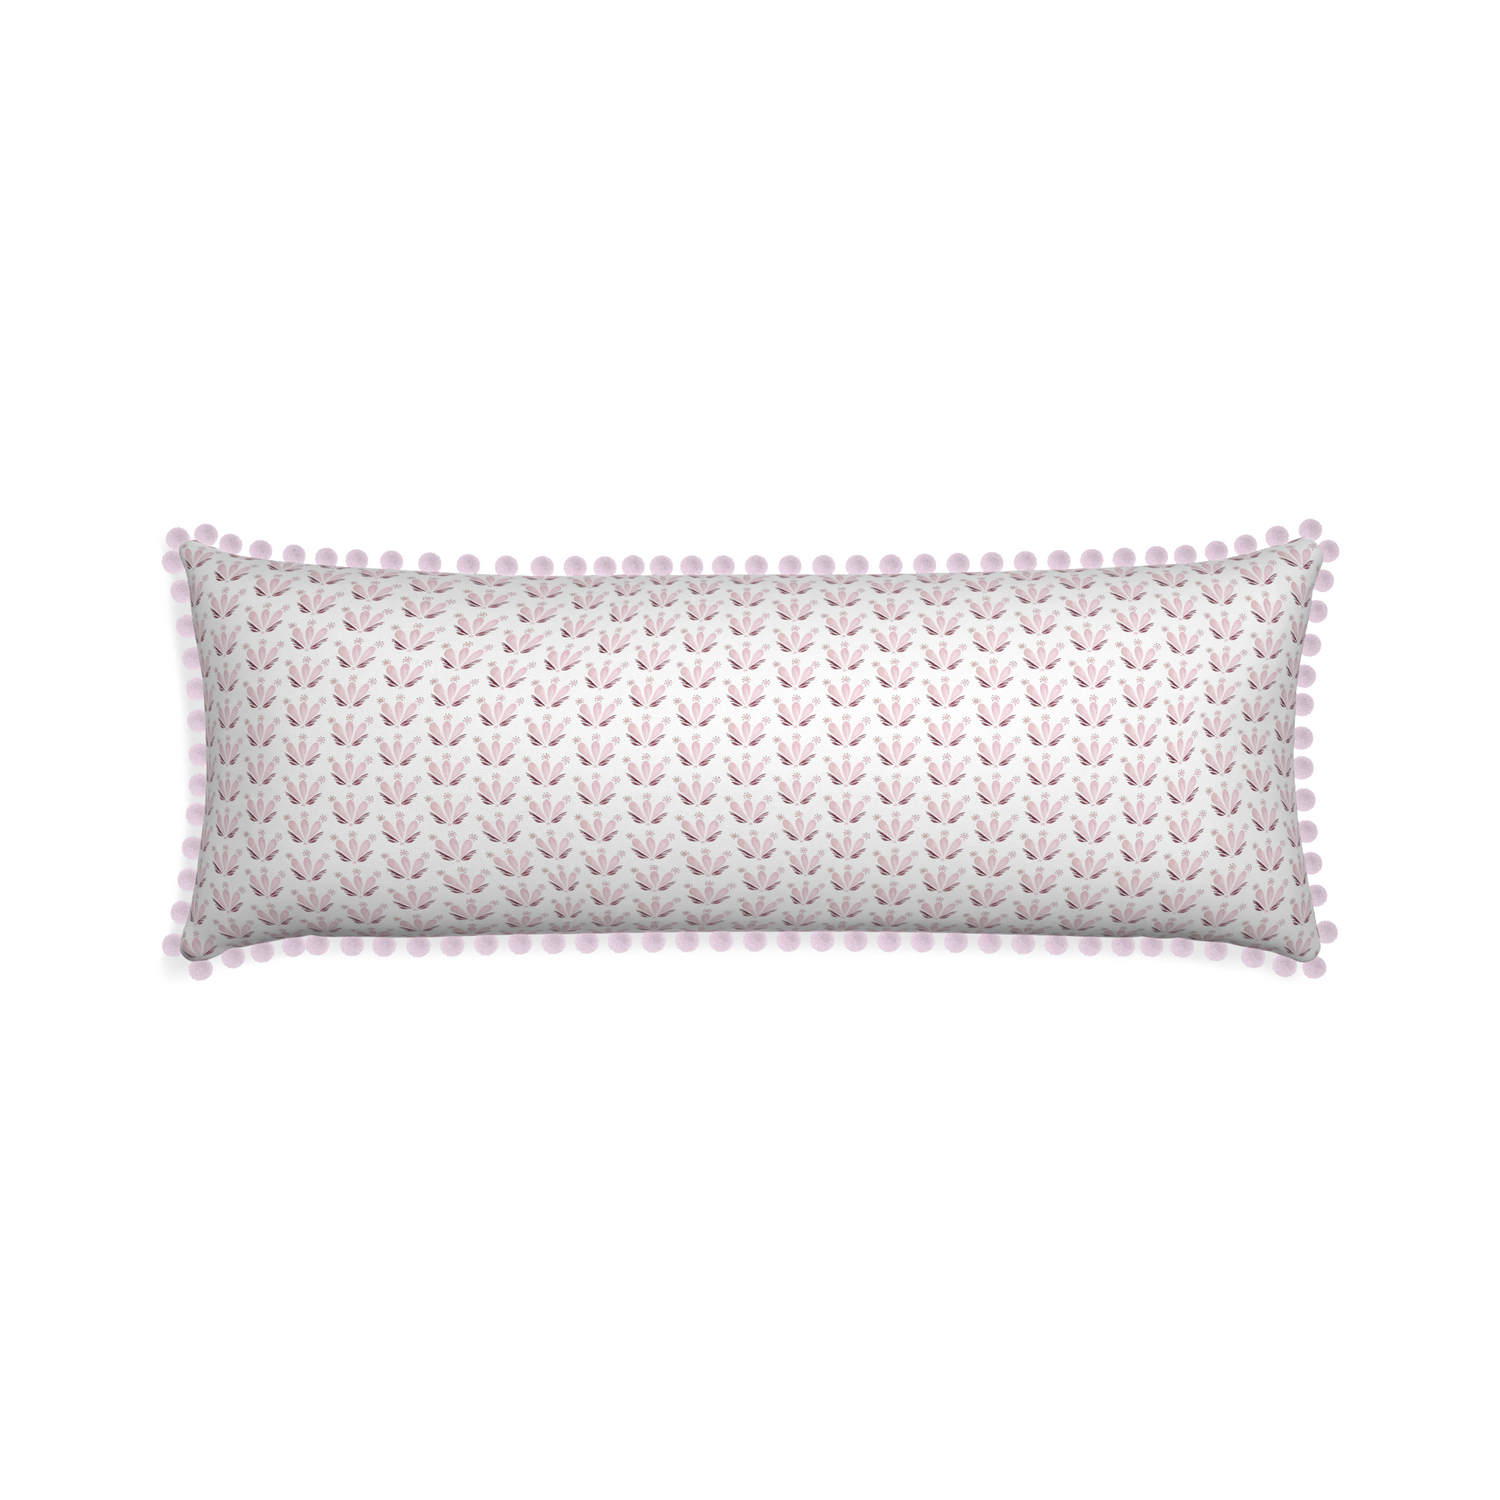 Xl-lumbar serena pink custom pillow with l on white background